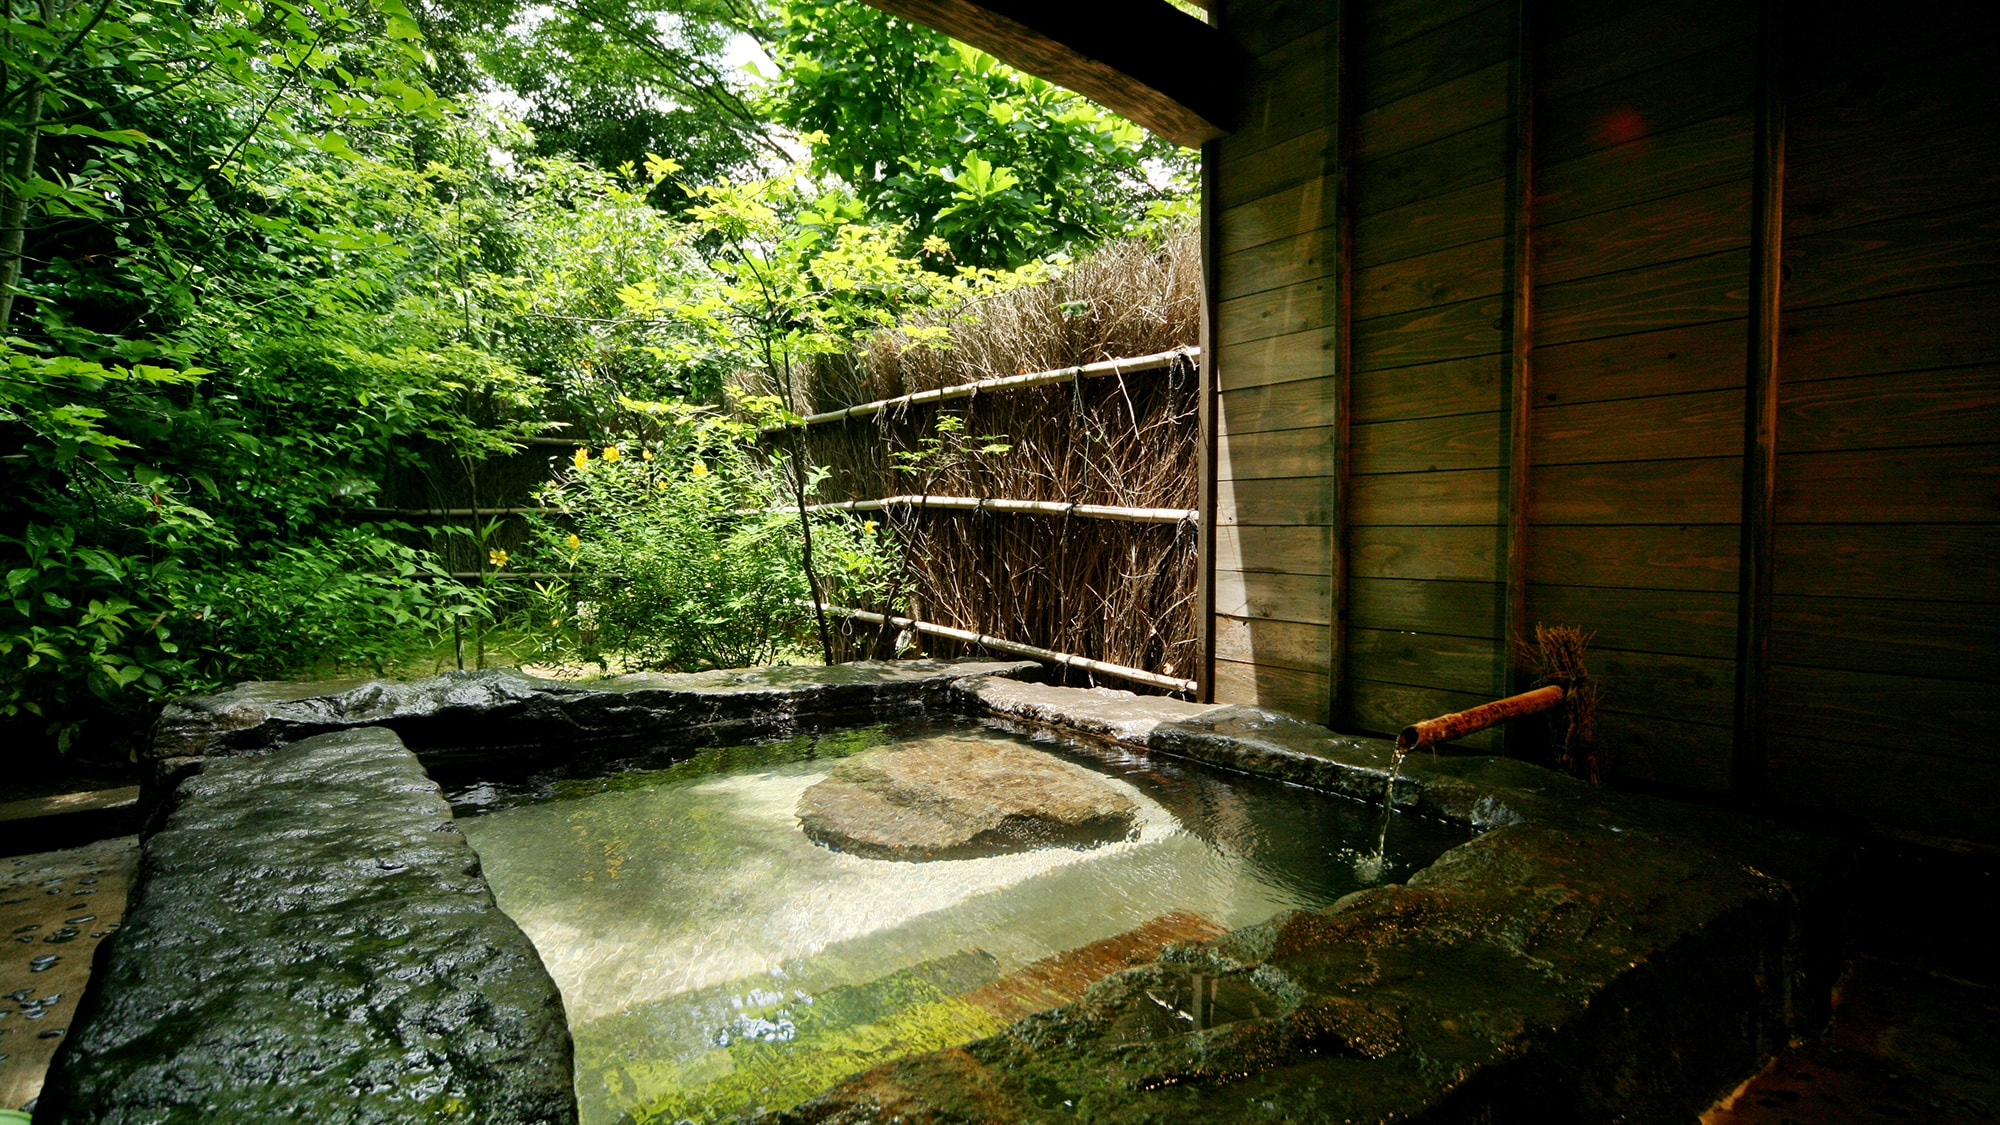 ◆ Chartered open-air bath ◇ Natsuhaze ◆ Enjoy the "thick and beautiful skin hot spring" peculiar to Miyanojo Onsen to your heart's content